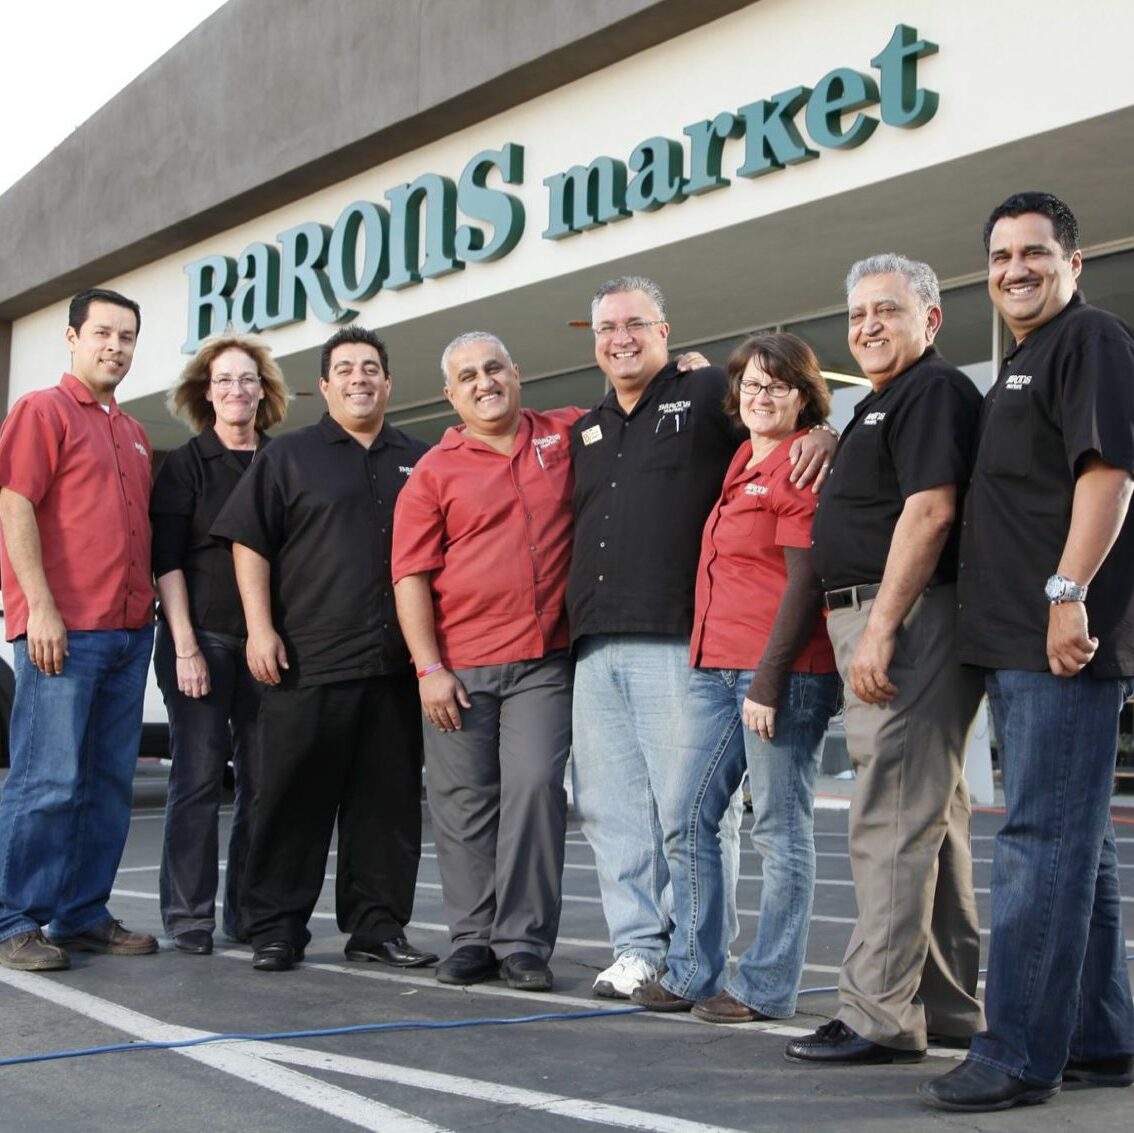 Barons staff standing in front of market